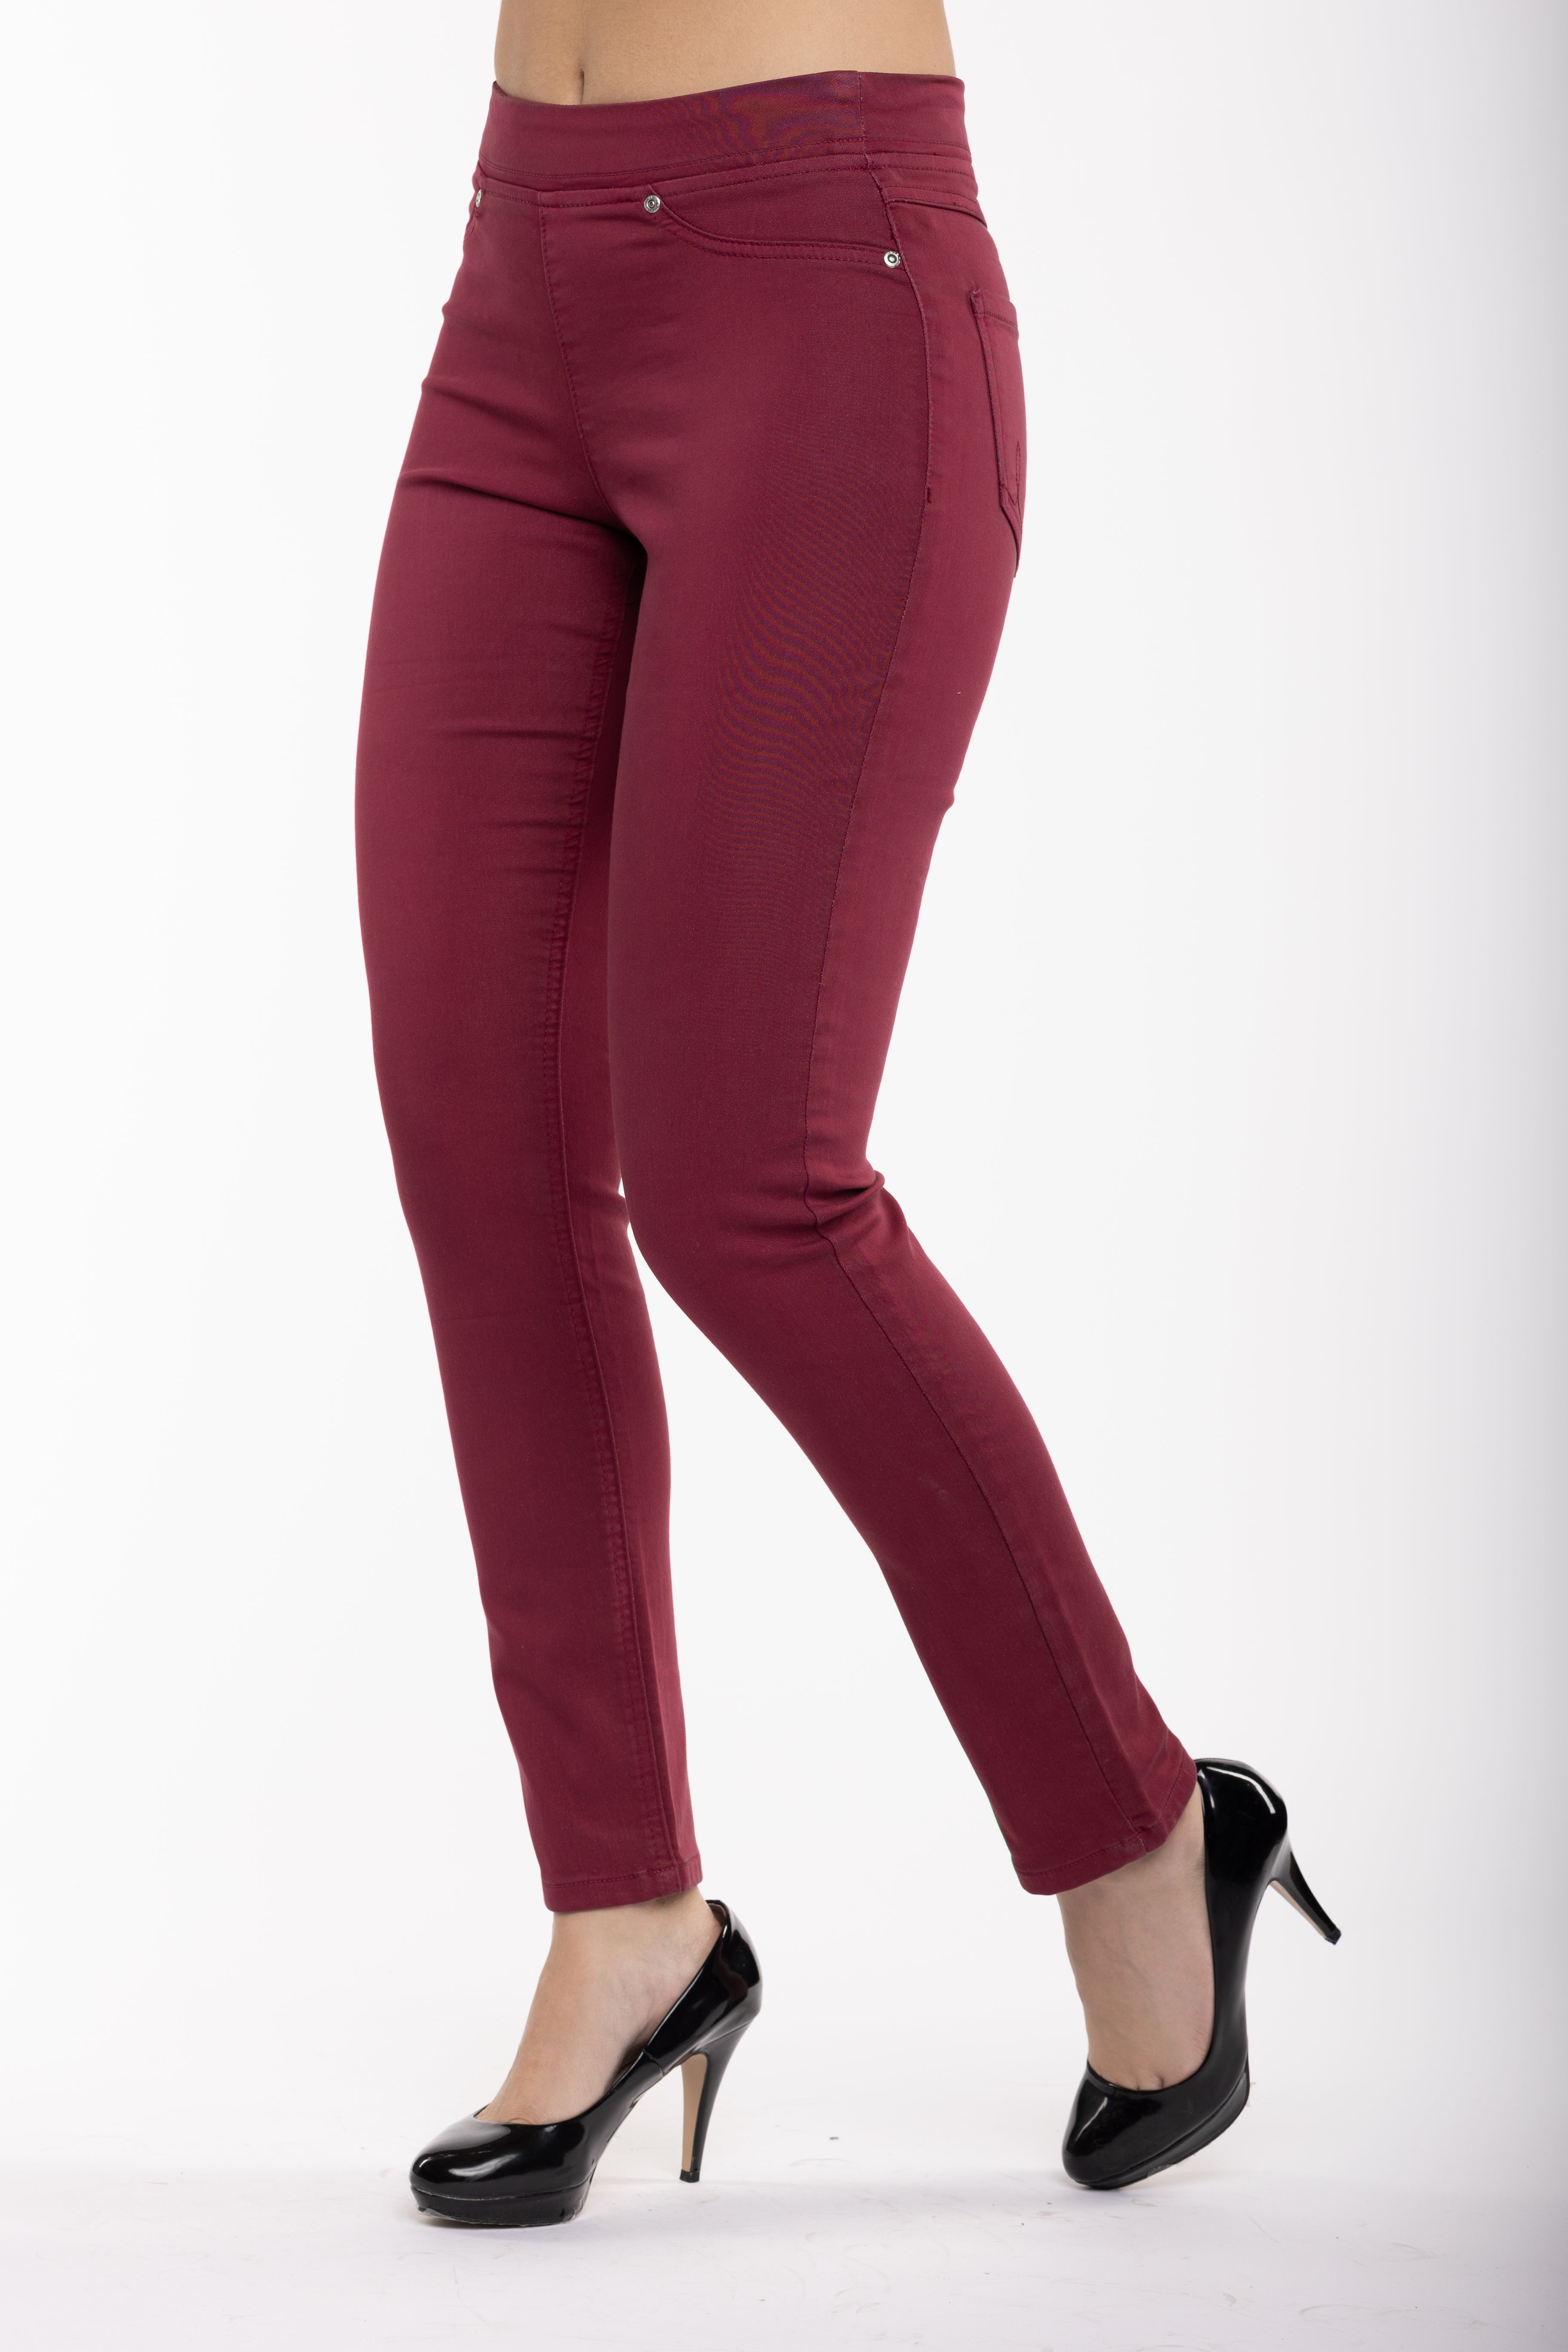 Angela Slim Leg Pull-On in Bordeaux French Terry Knit